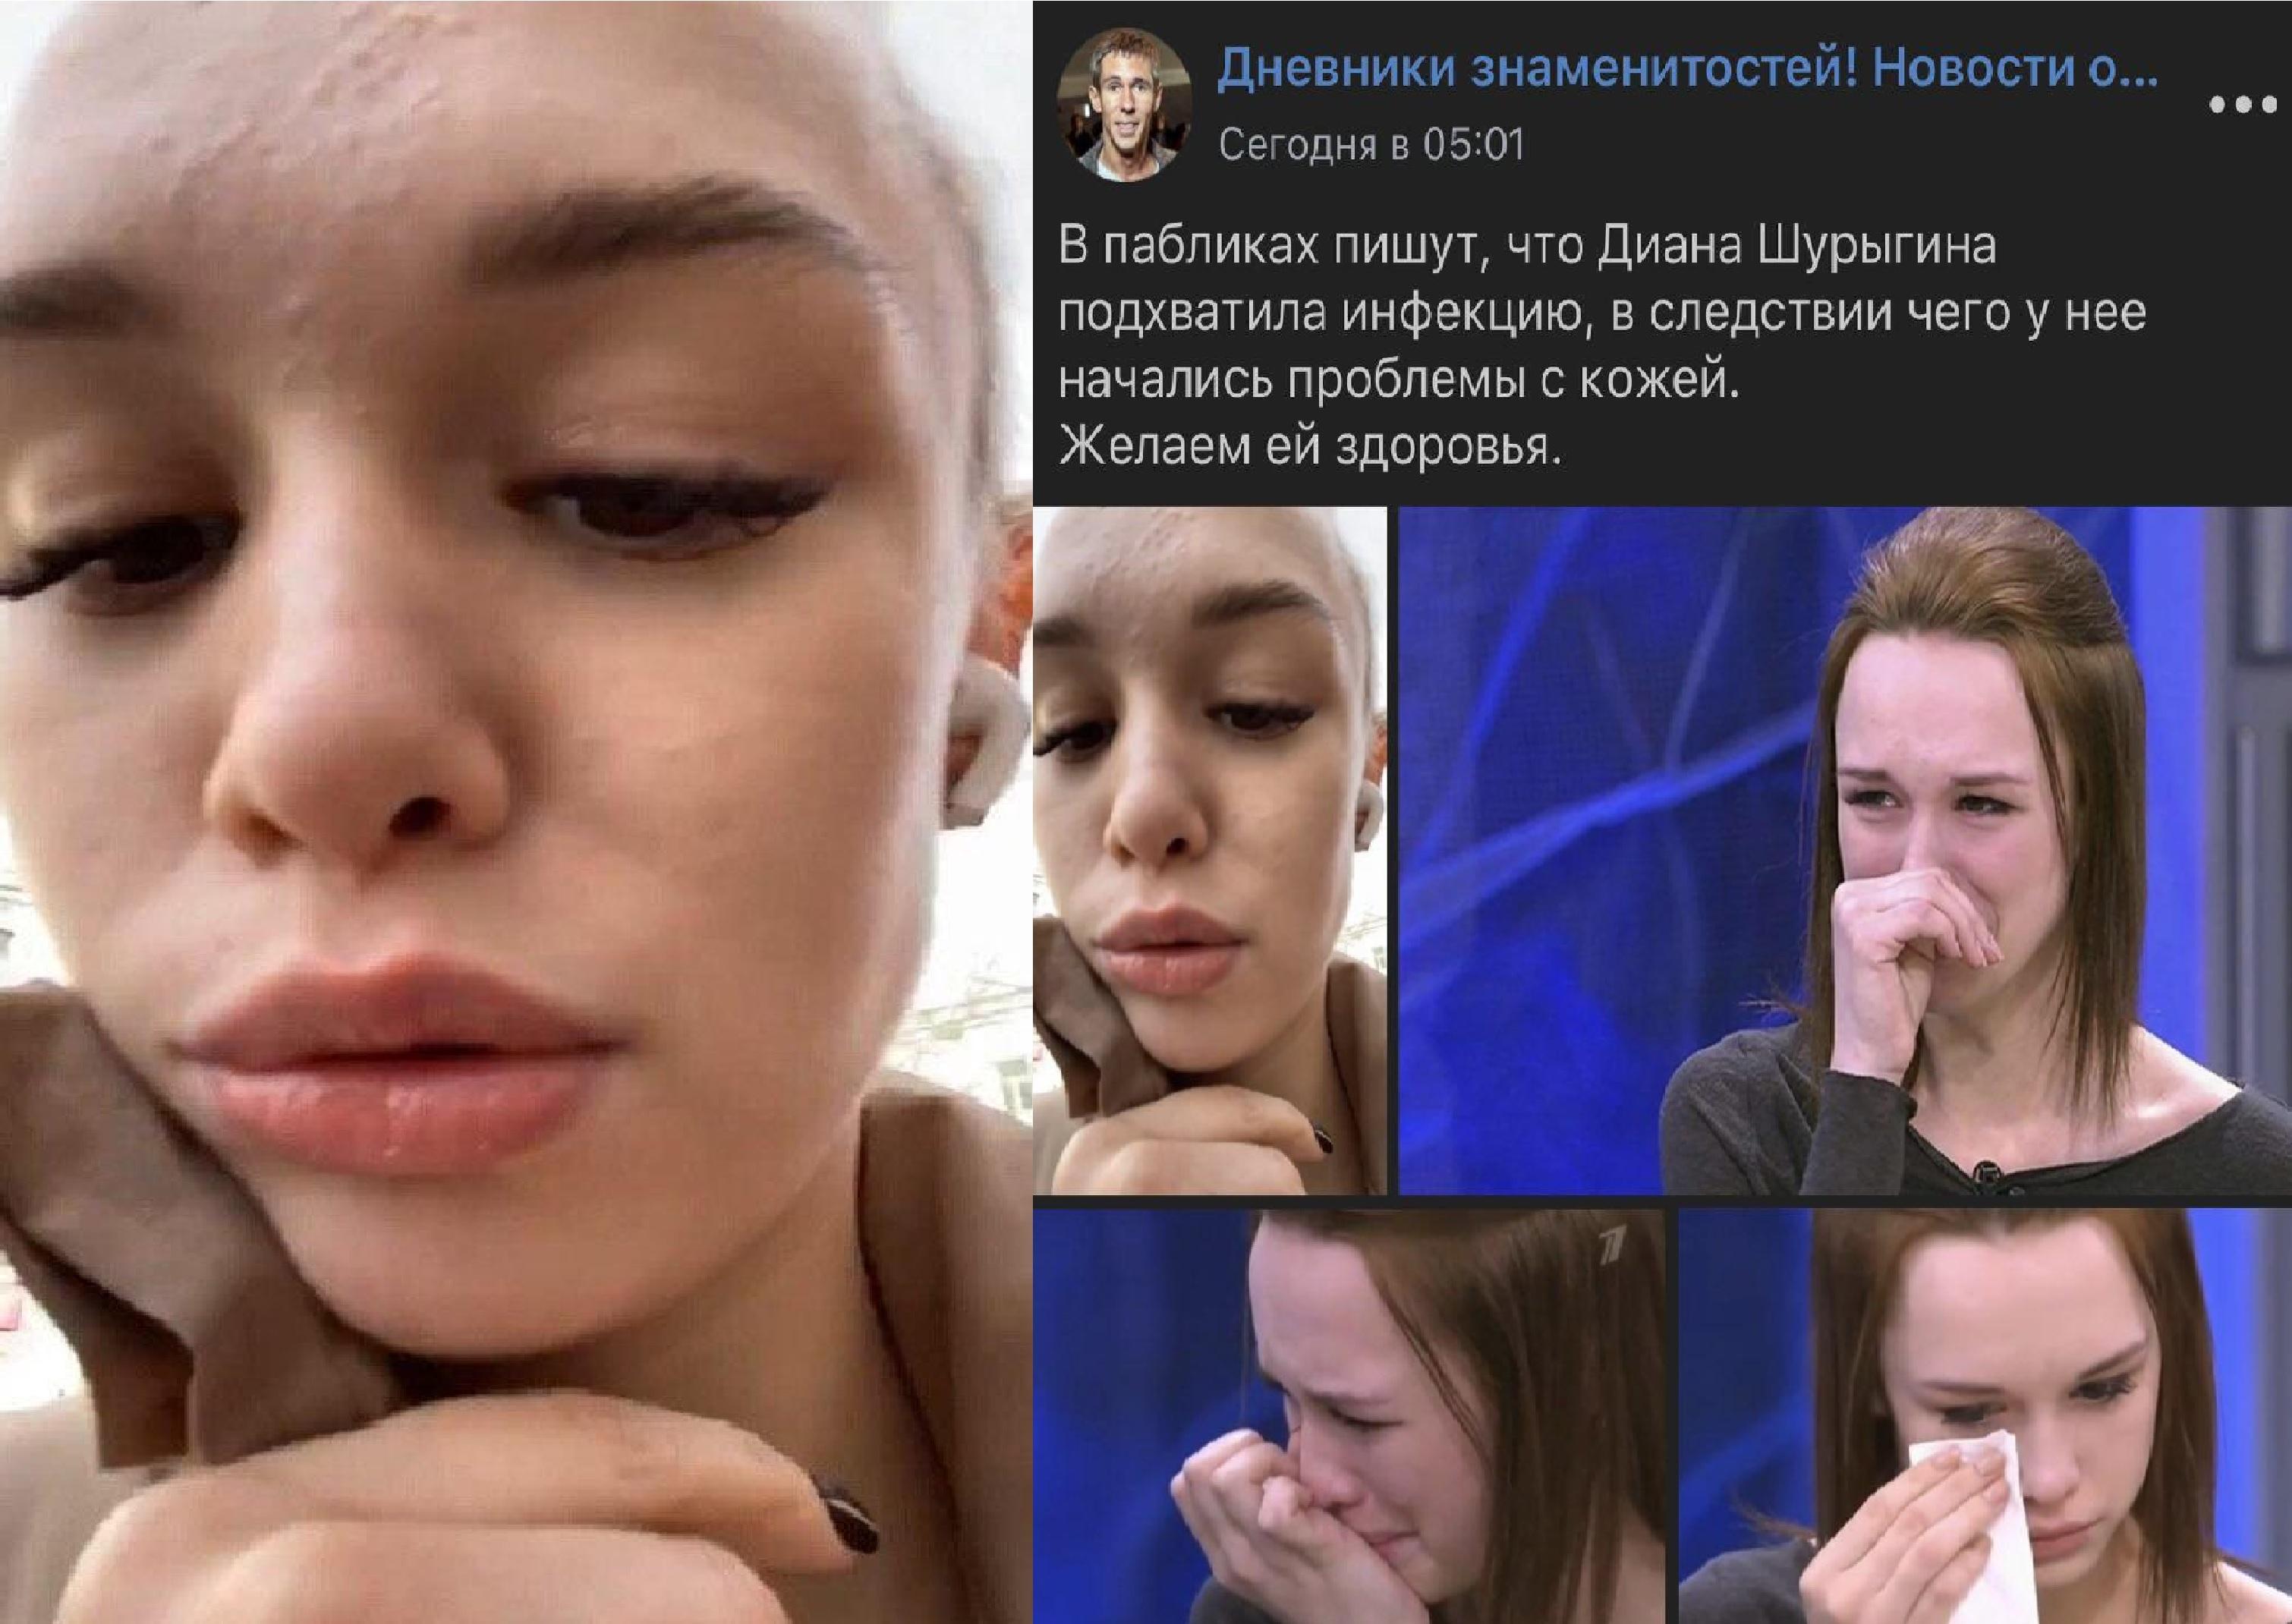 Onlifans Шурыгина Сливы